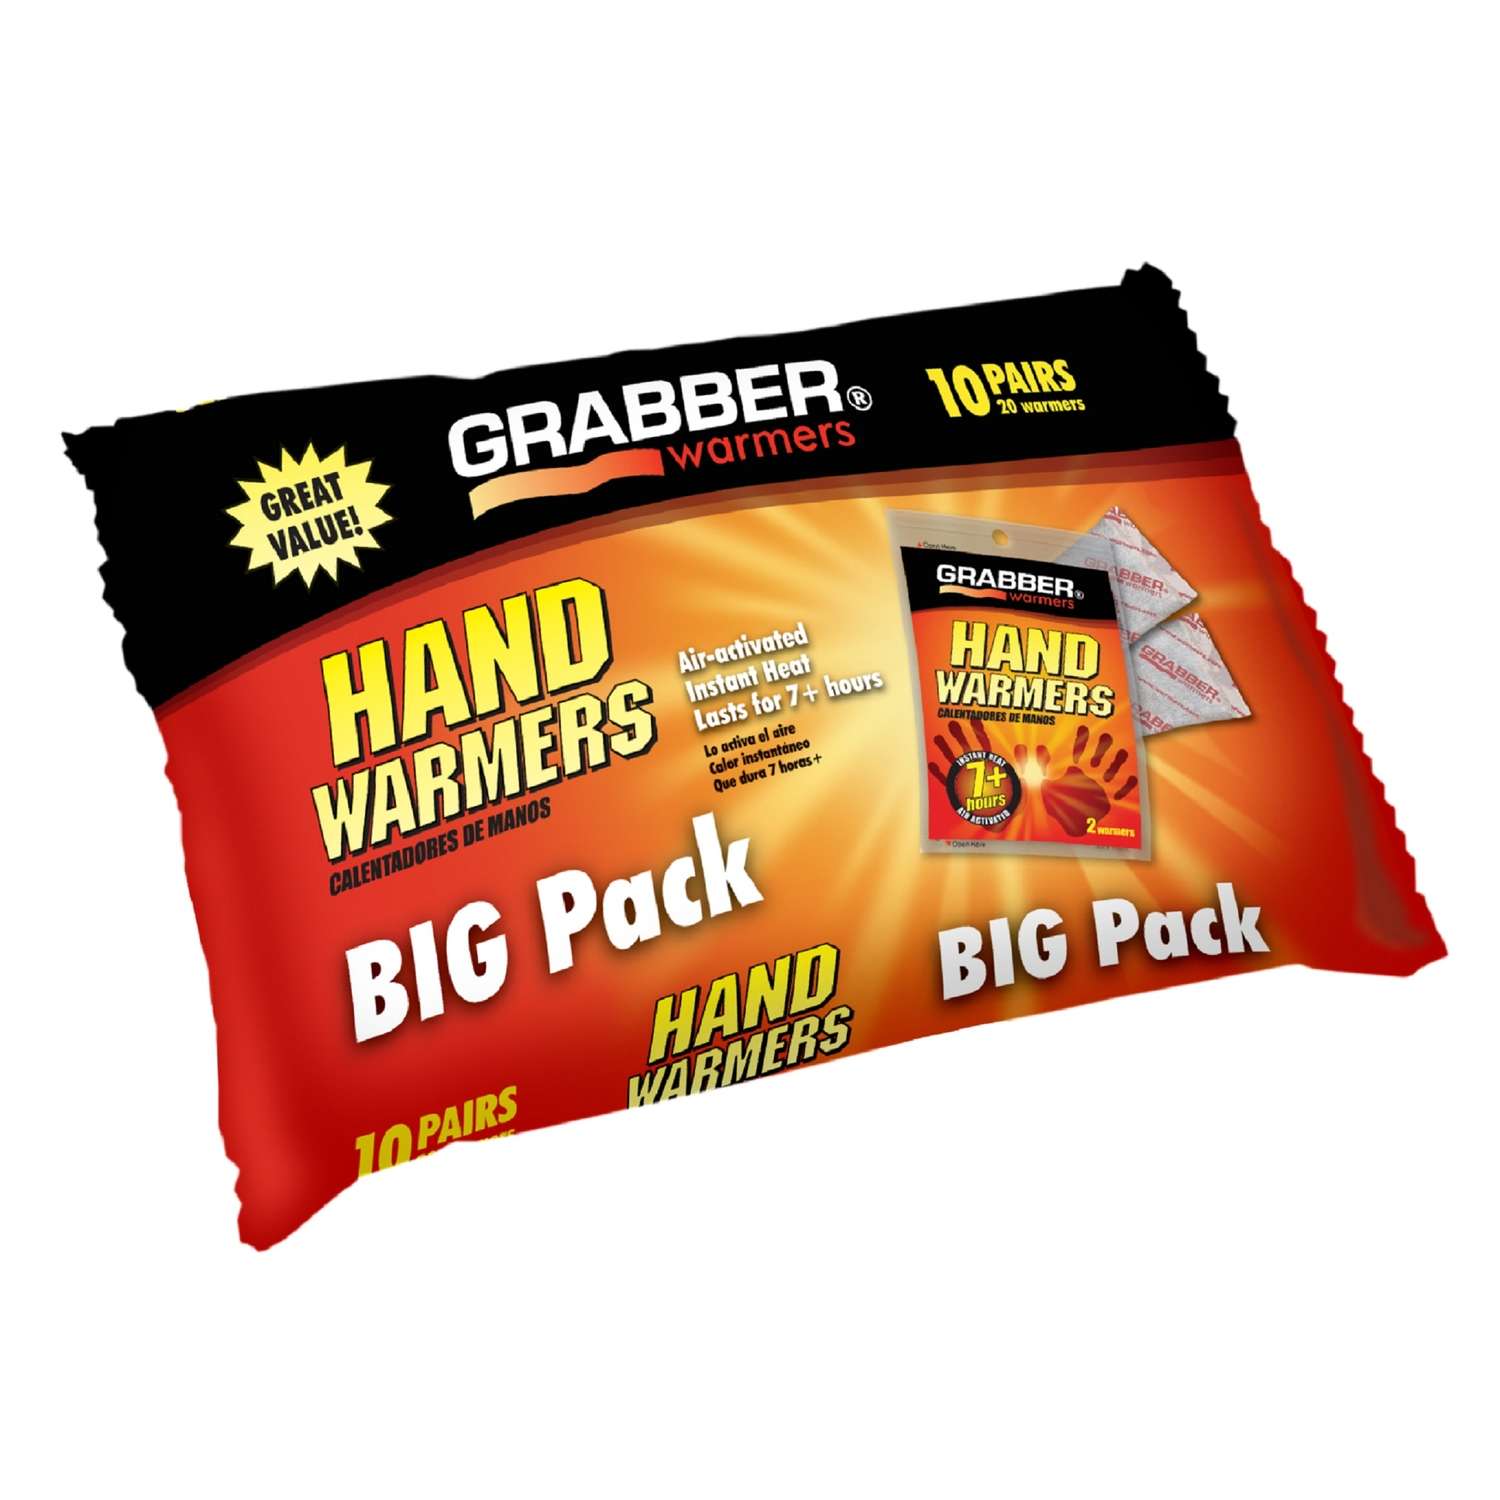 Hand Warmers Hot Hands Foot Heat Warming Outdoors Work Camping Novelty Gift 